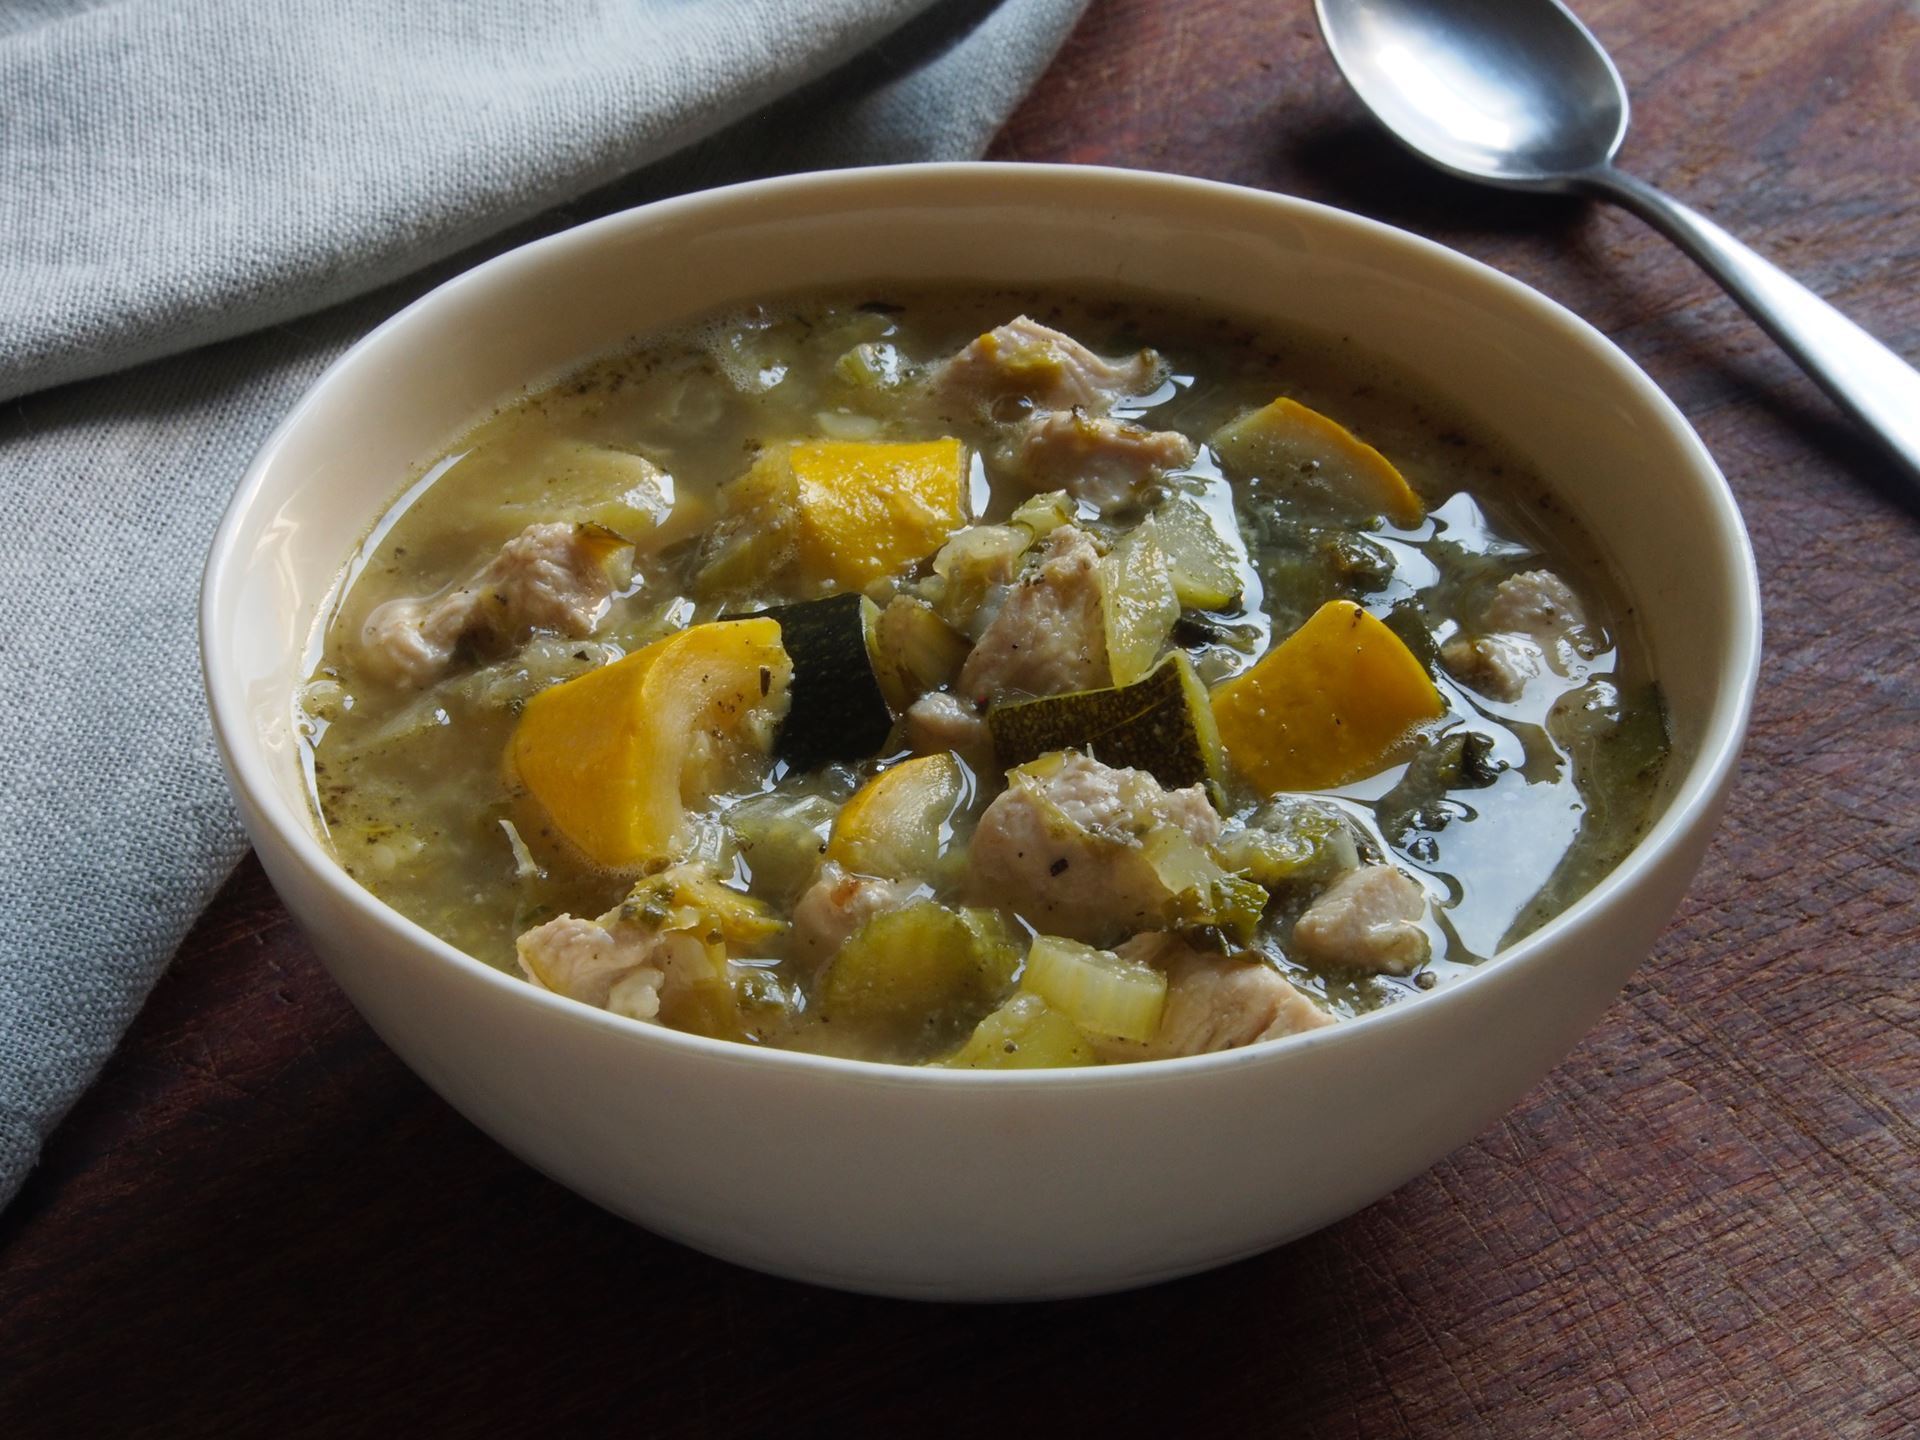 Picture of 22 oz -- Chicken-Vegetable Soup with Summer Squash and Chard